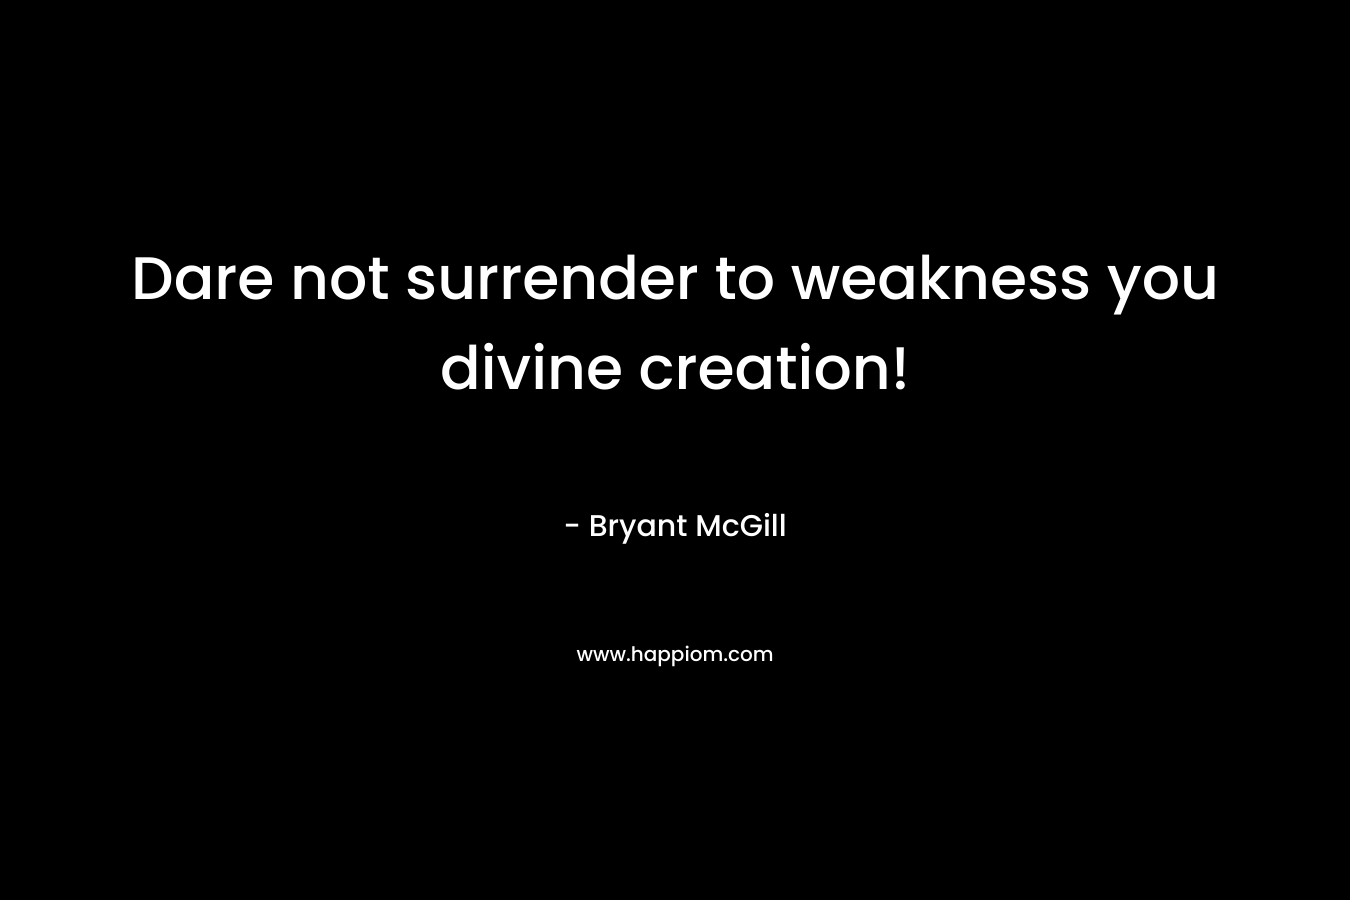 Dare not surrender to weakness you divine creation! – Bryant McGill